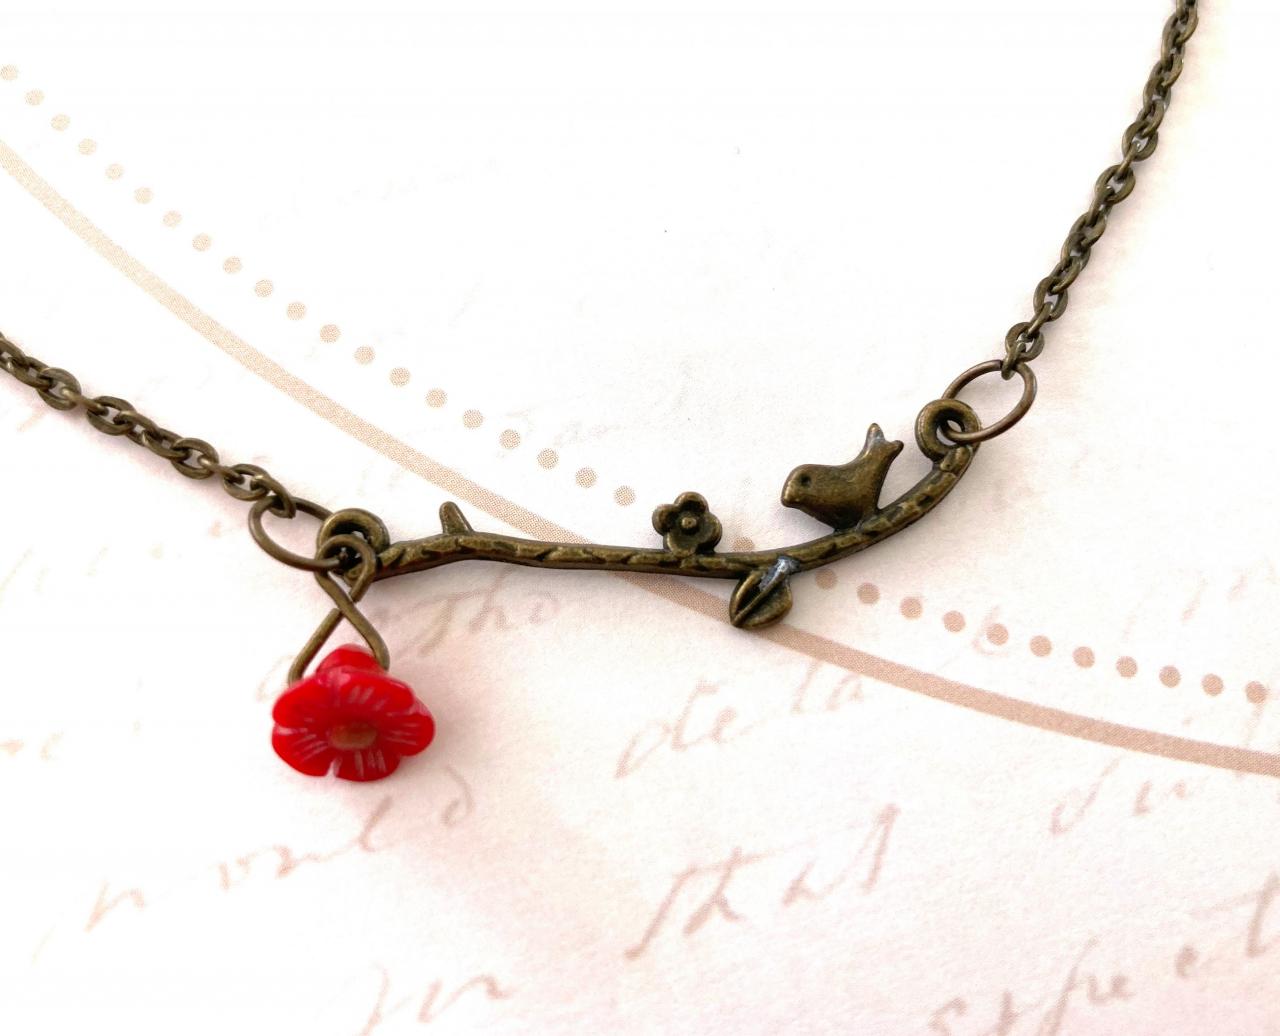 Adorable Bird Necklace With A Glass Flower Bead, Selma Dreams